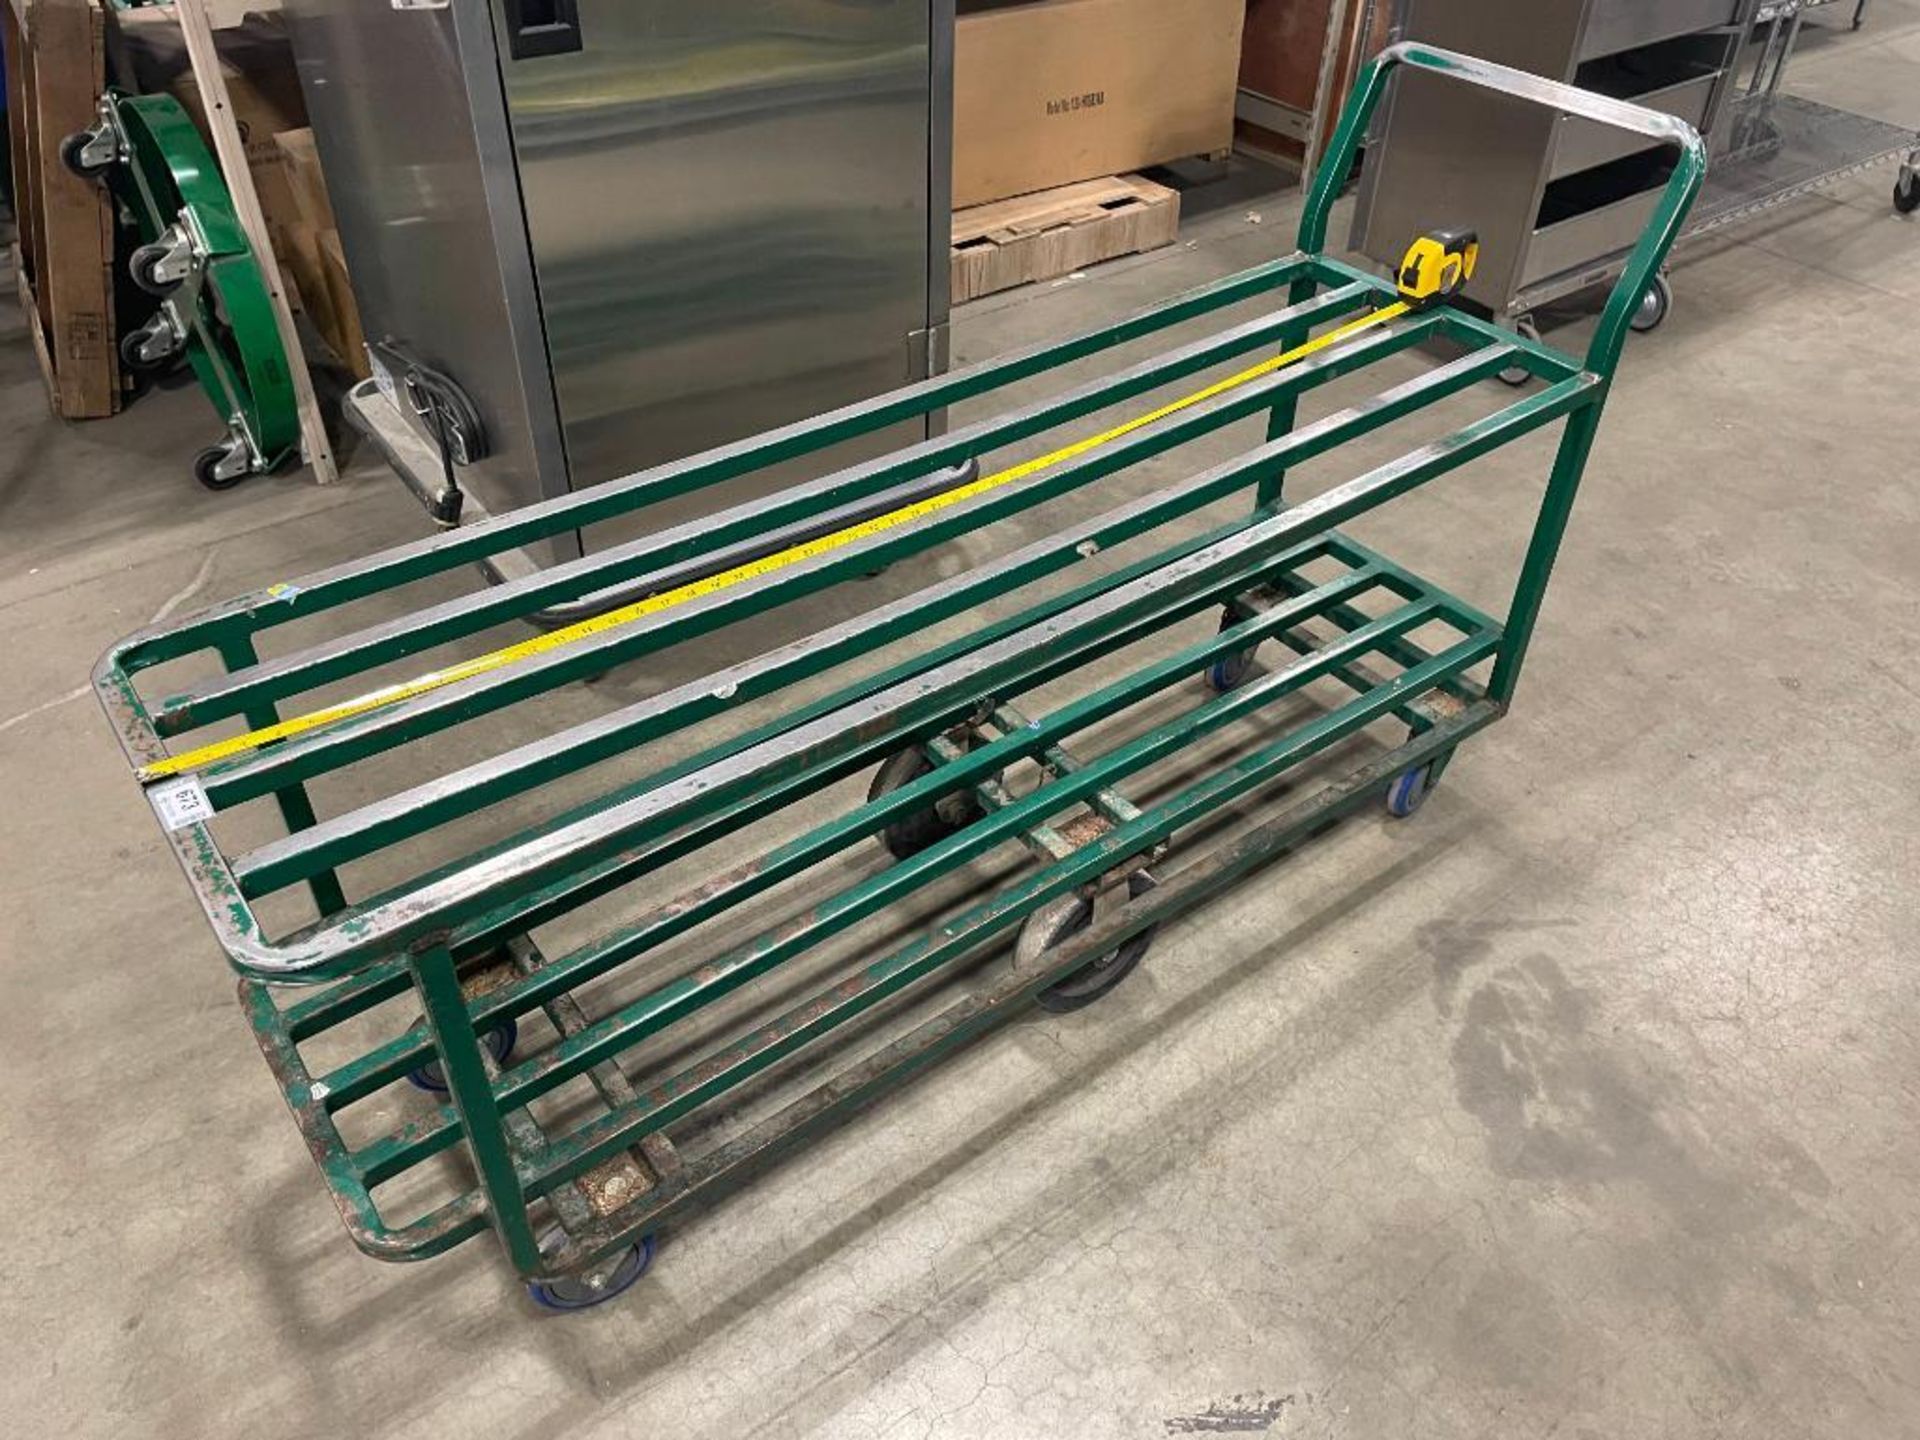 2 TIER GREEN STEEL WAREHOUSE STOCKING CART - Image 5 of 5